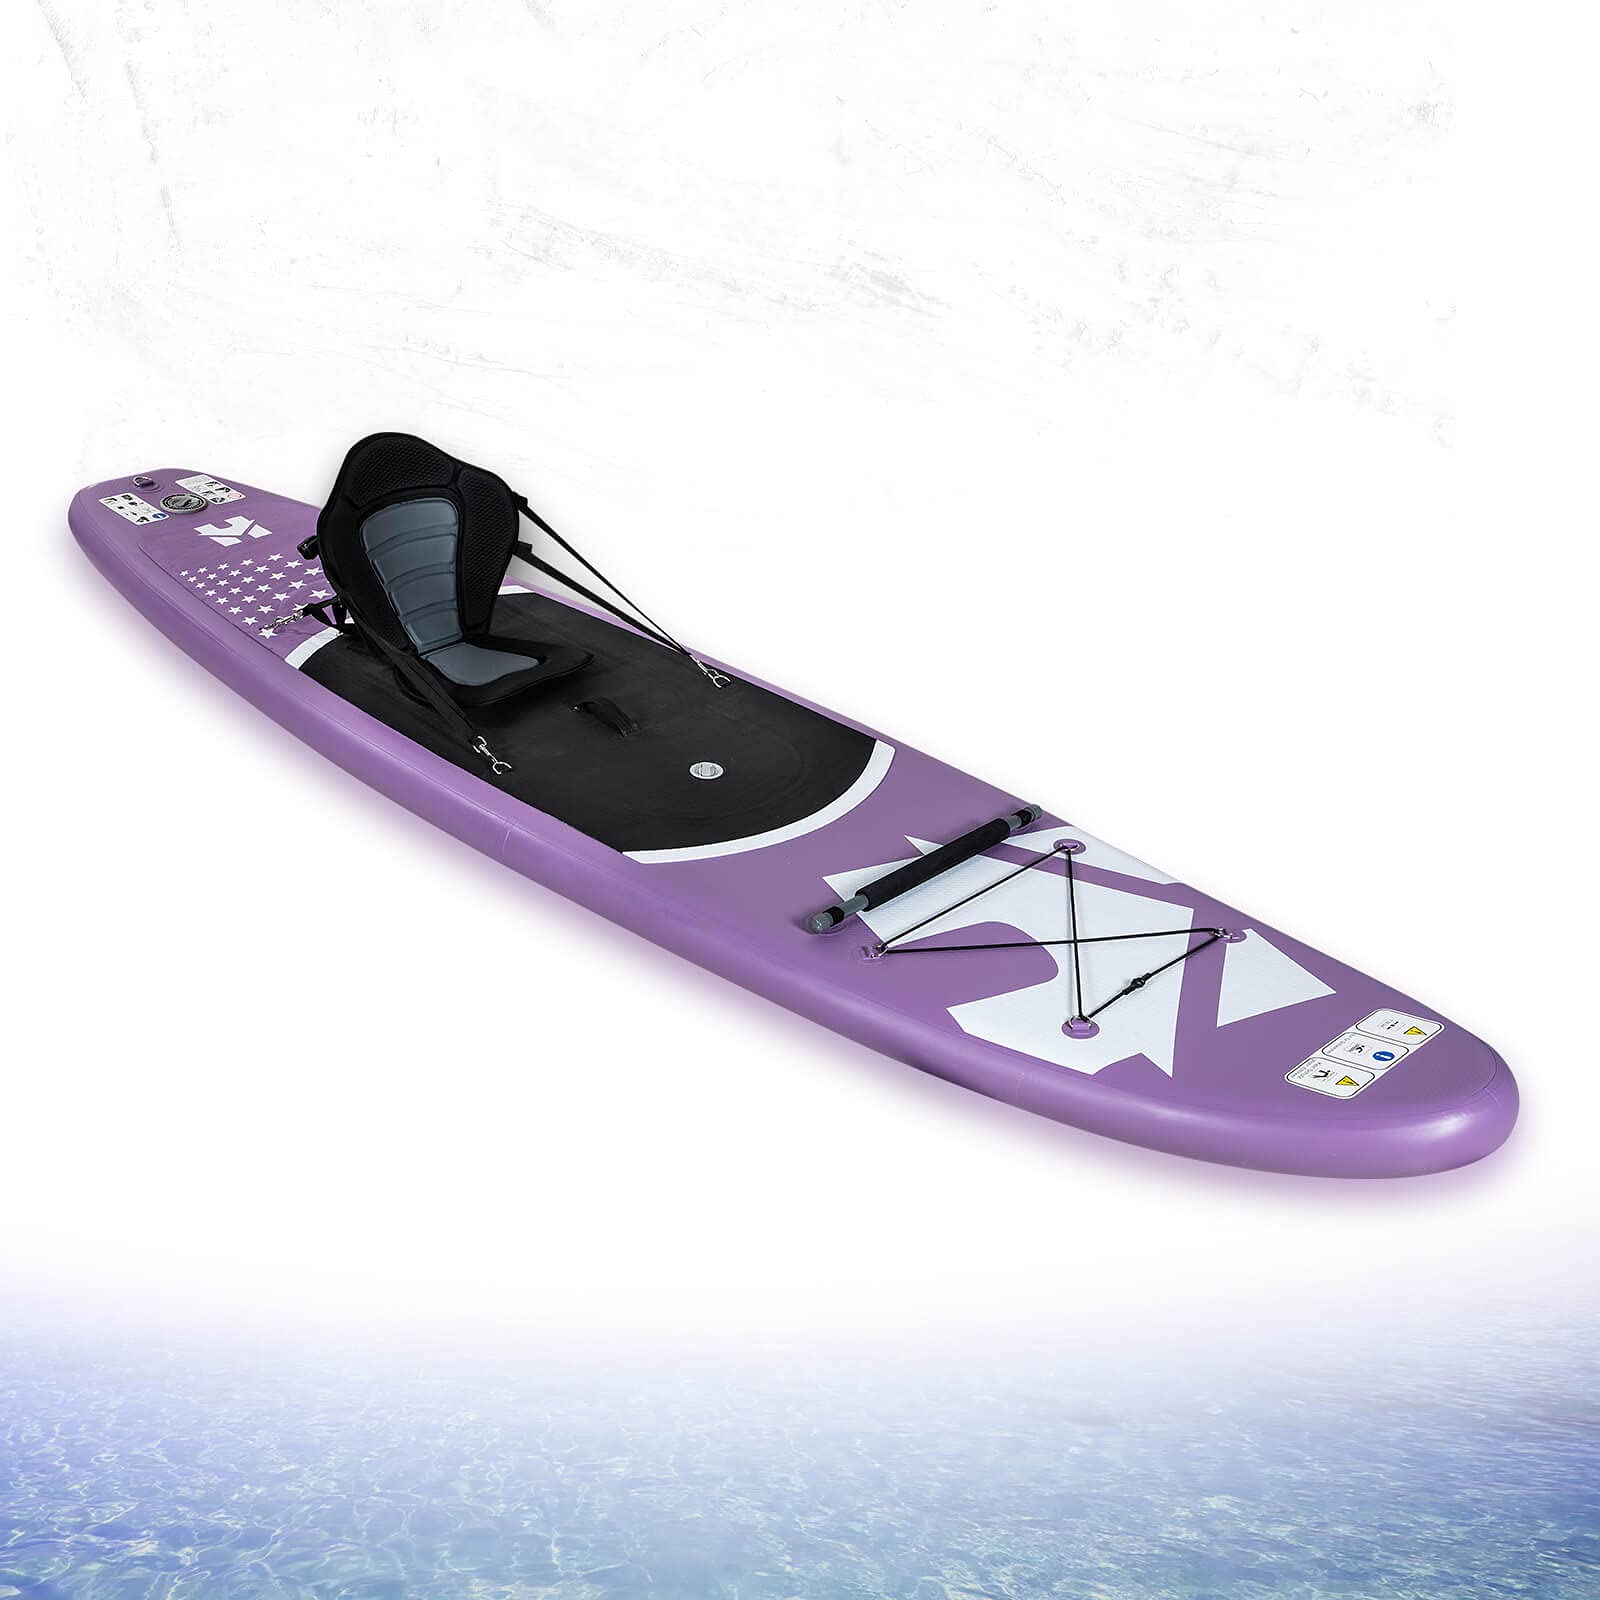 Home Deluxe - Stand up Paddle Moana - Farbe: Lila, Länge: 366 cm, Breite 81 cm - inkl. Paddel, Reparatur Kit, Transporttasche, Luftpumpe und Sitzbänken | SUP Surfboard Paddle